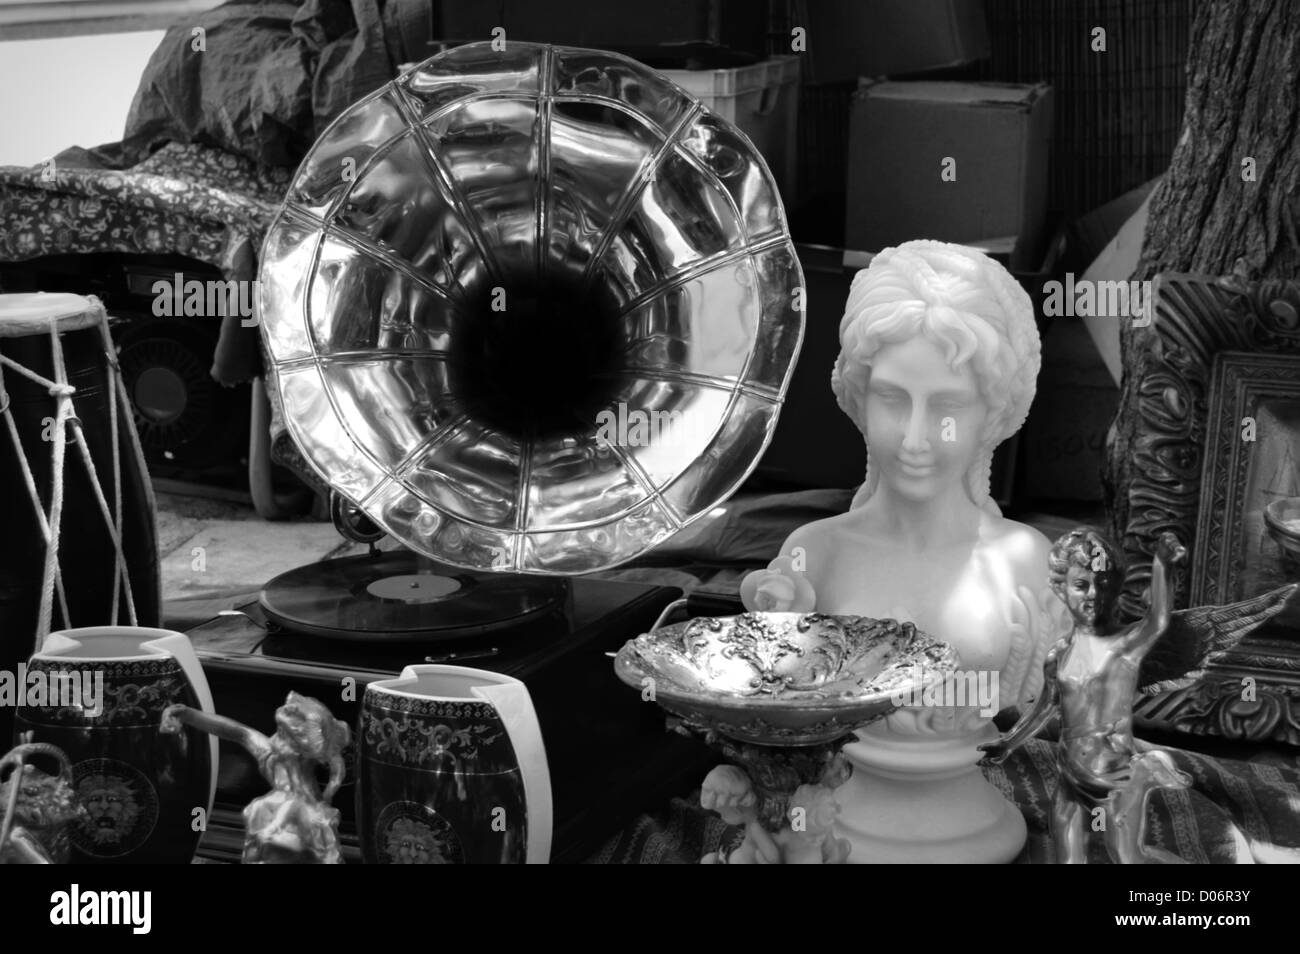 Vintage gramophone and antique objects at street fair. Black and white. Stock Photo